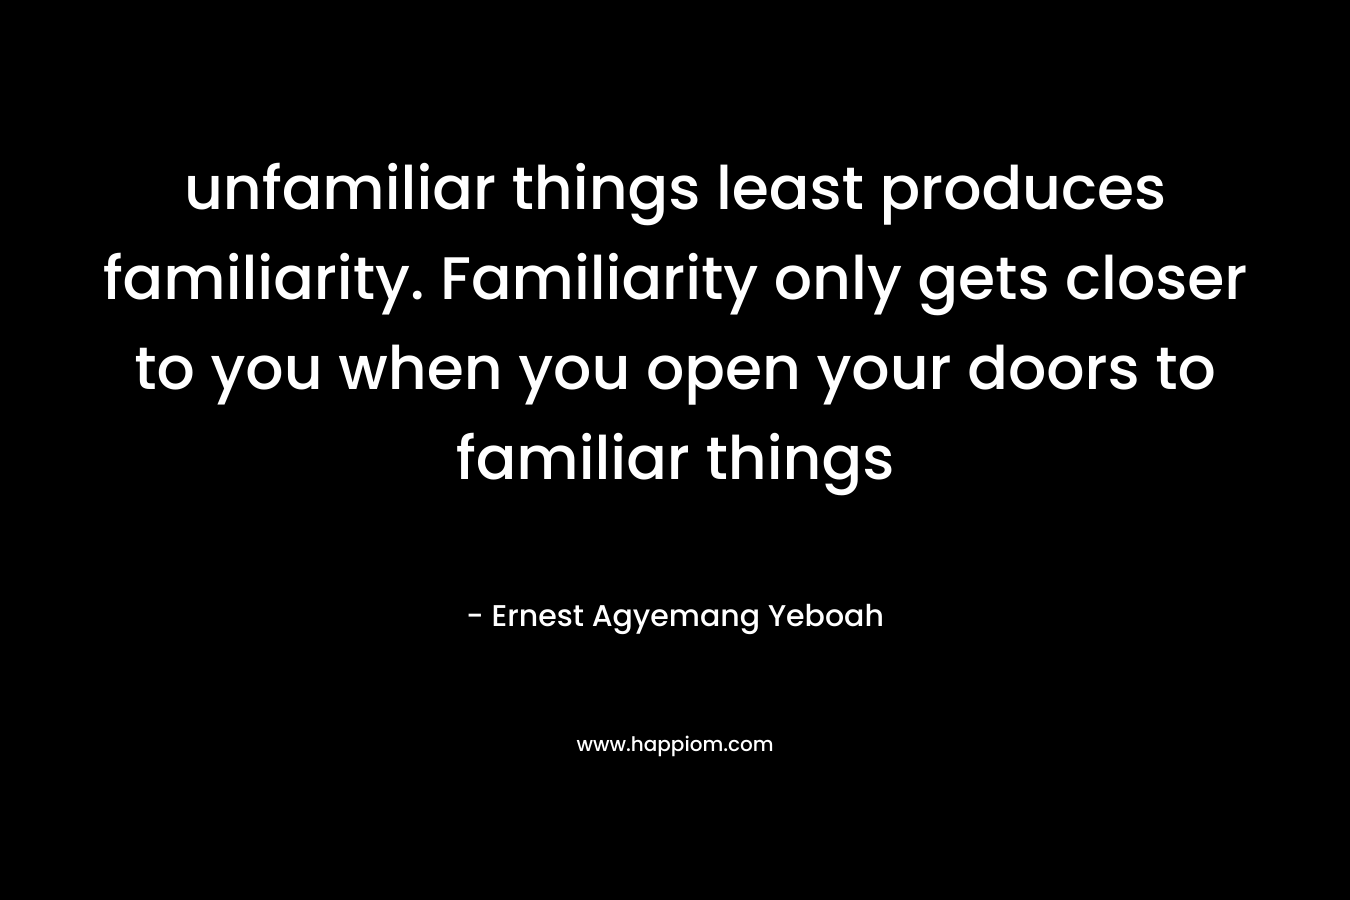 unfamiliar things least produces familiarity. Familiarity only gets closer to you when you open your doors to familiar things – Ernest Agyemang Yeboah